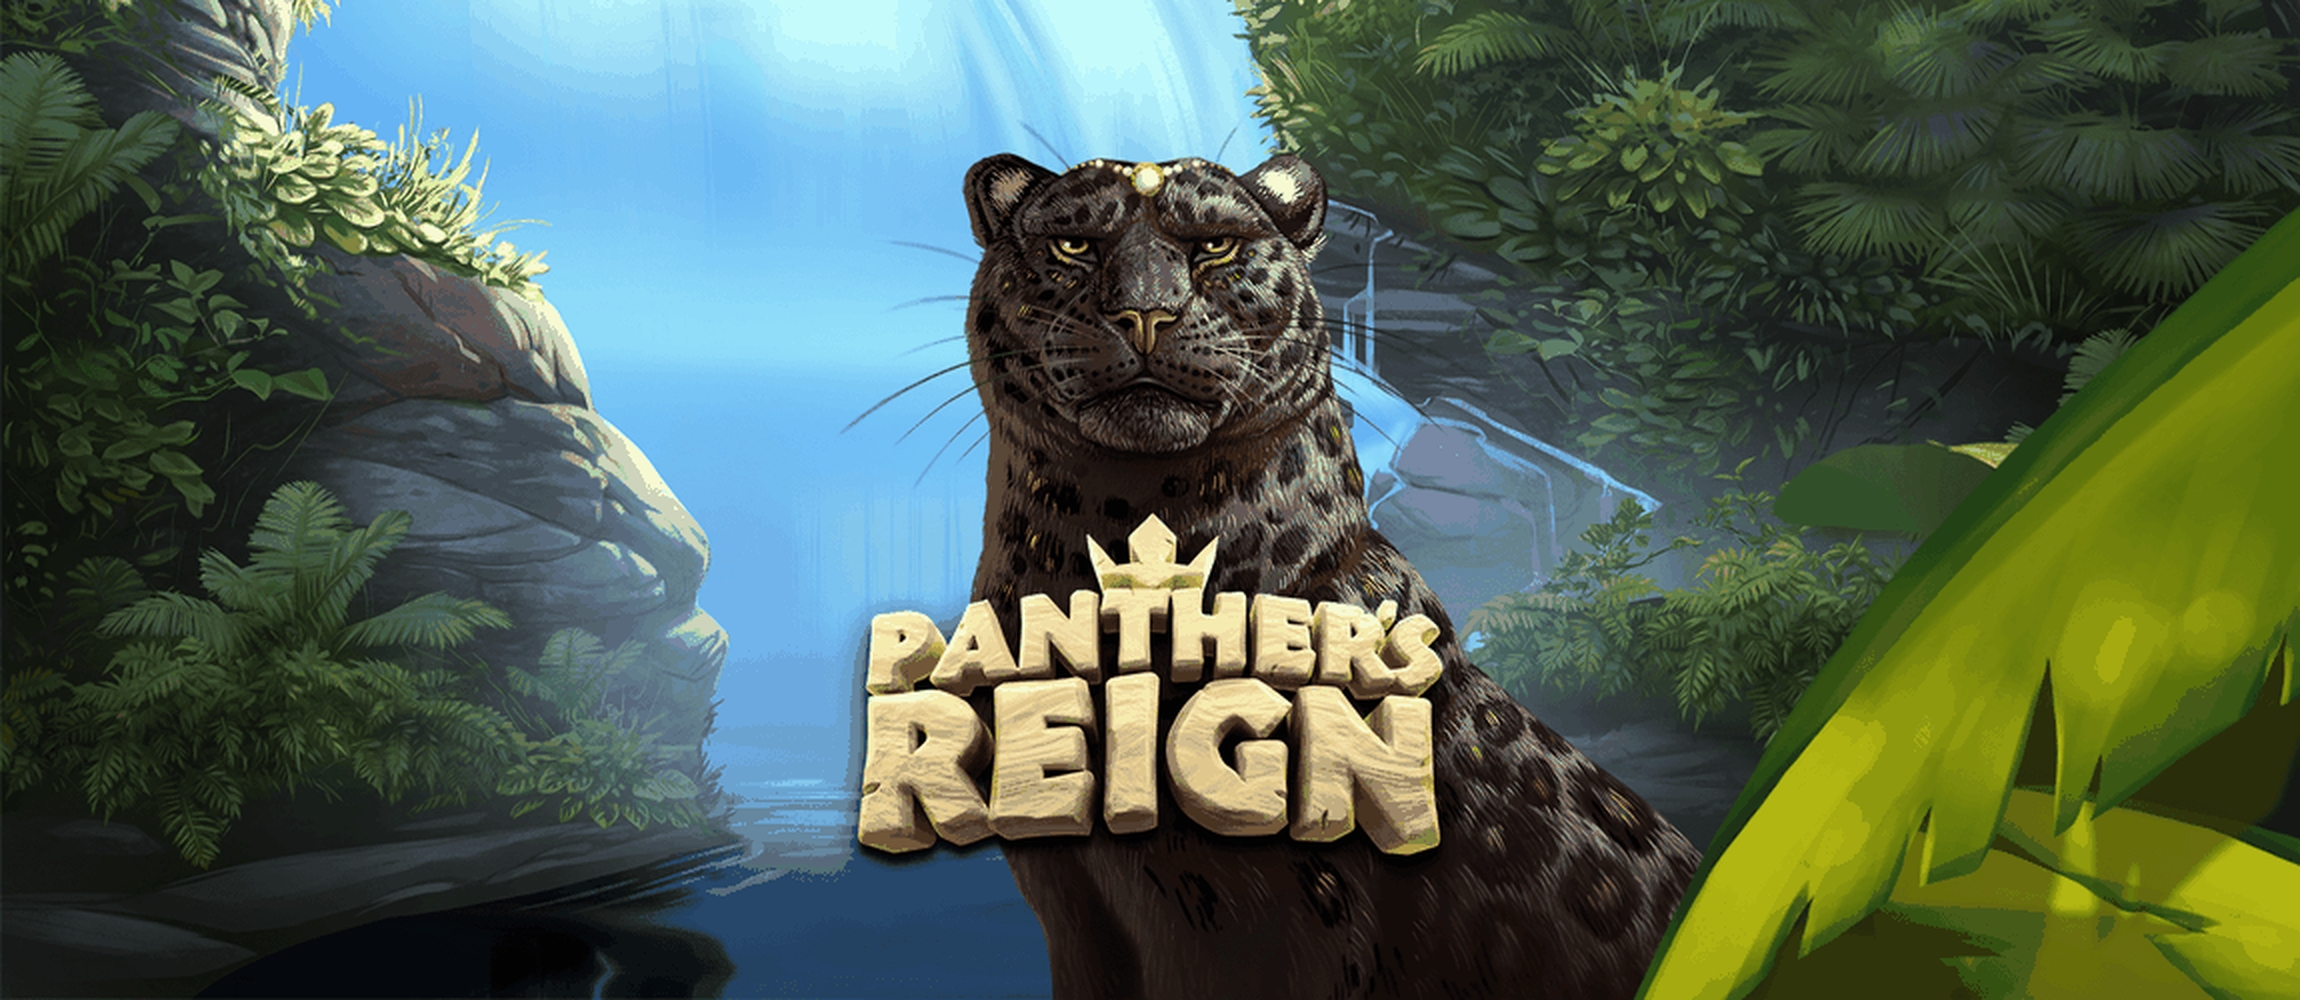 The Panthers Reign Online Slot Demo Game by Quickspin